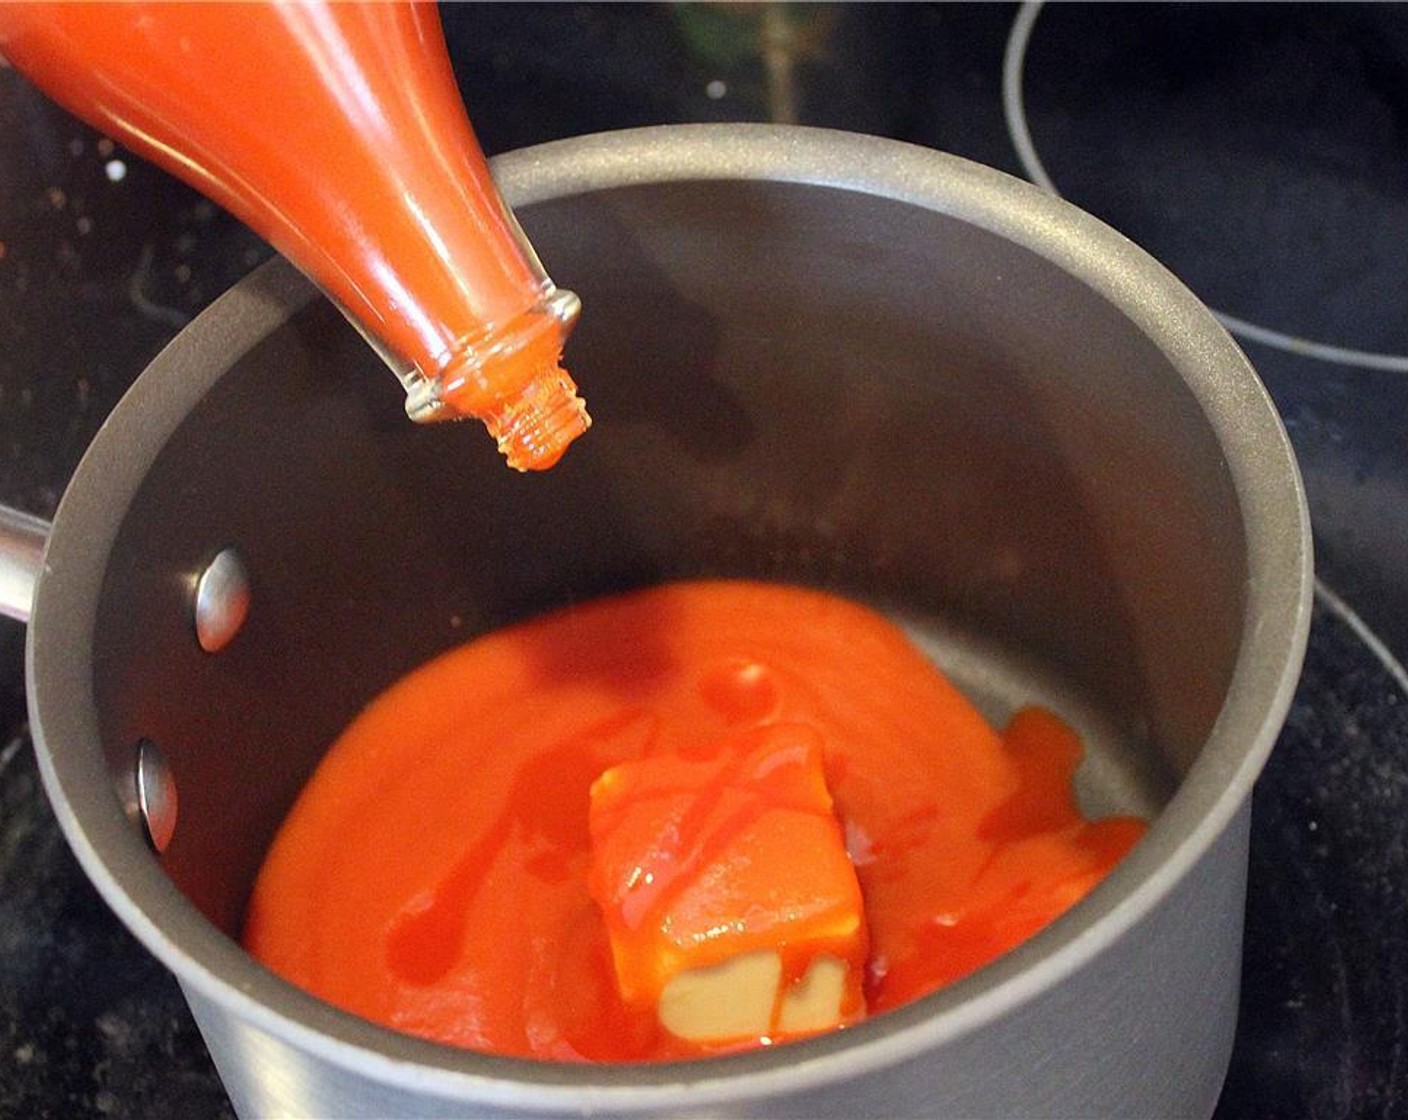 step 1 In a small pan, add Tomato Sauce (1 cup), Unsalted Butter (3 Tbsp) and Hot Sauce (1/4 cup). Mix and melt the unsalted butter over medium heat. Turn the burner off once the butter has melted.